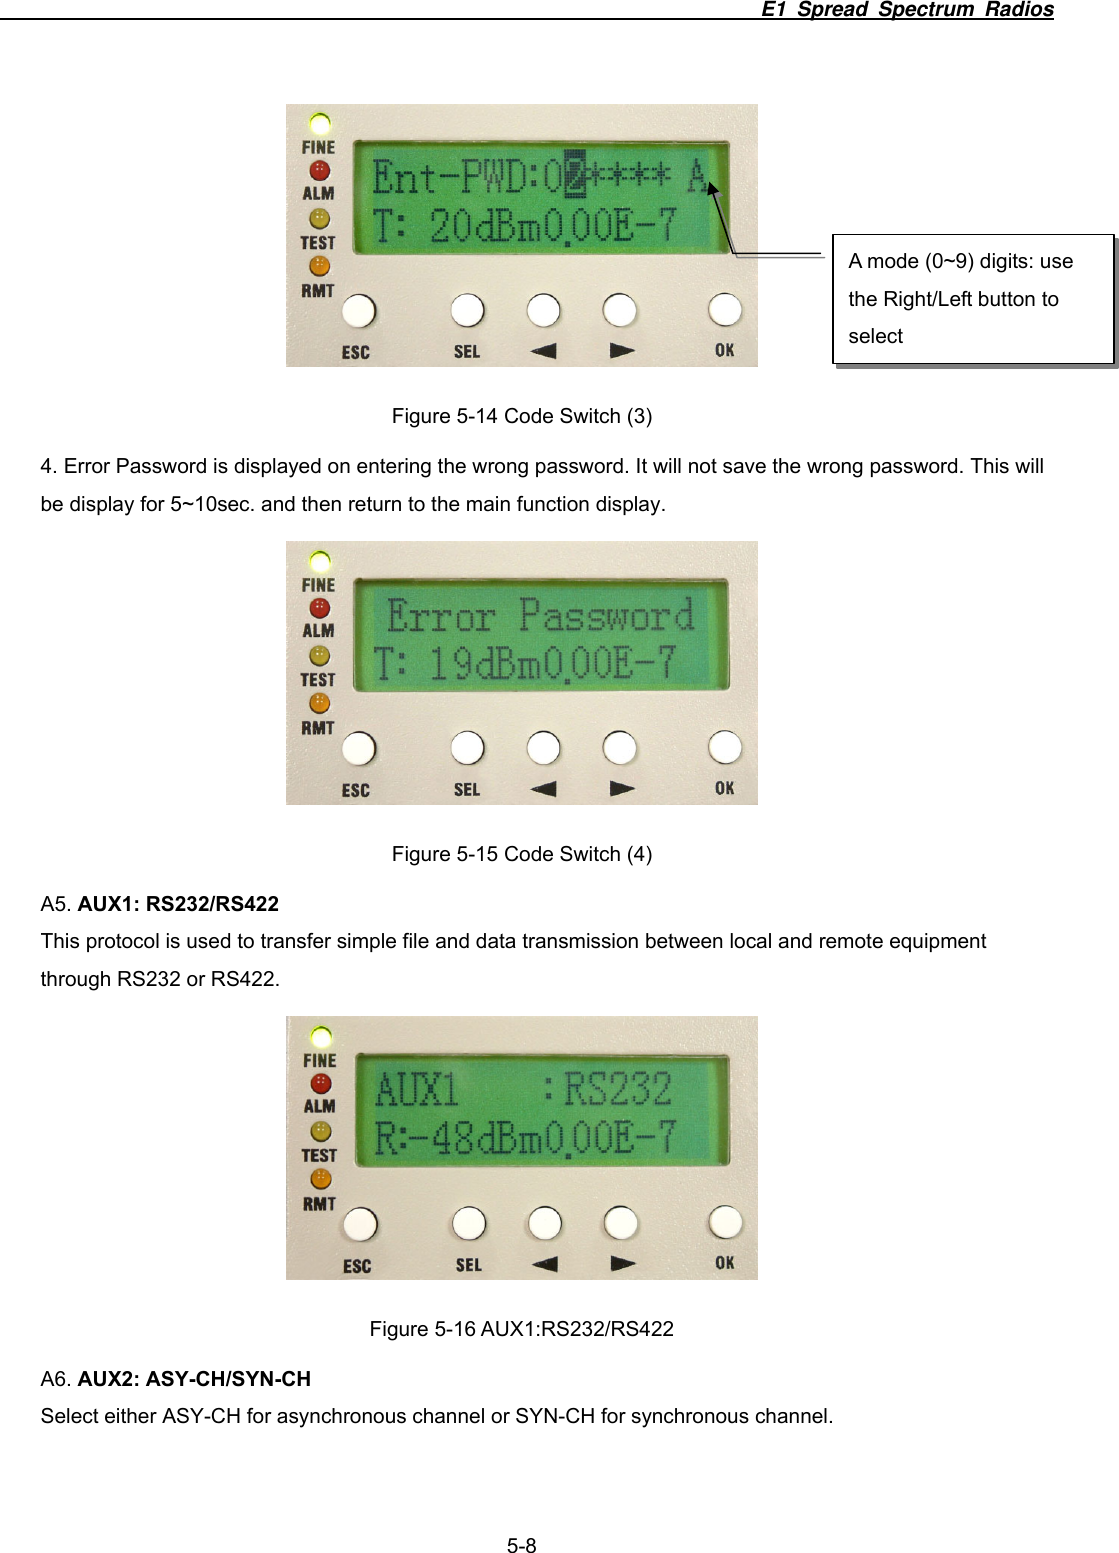                                                                          E1 Spread Spectrum Radios              5-8  Figure 5-14 Code Switch (3) 4. Error Password is displayed on entering the wrong password. It will not save the wrong password. This will be display for 5~10sec. and then return to the main function display.  Figure 5-15 Code Switch (4) A5. AUX1: RS232/RS422 This protocol is used to transfer simple file and data transmission between local and remote equipment through RS232 or RS422.  Figure 5-16 AUX1:RS232/RS422 A6. AUX2: ASY-CH/SYN-CH Select either ASY-CH for asynchronous channel or SYN-CH for synchronous channel. A mode (0~9) digits: use the Right/Left button to select 